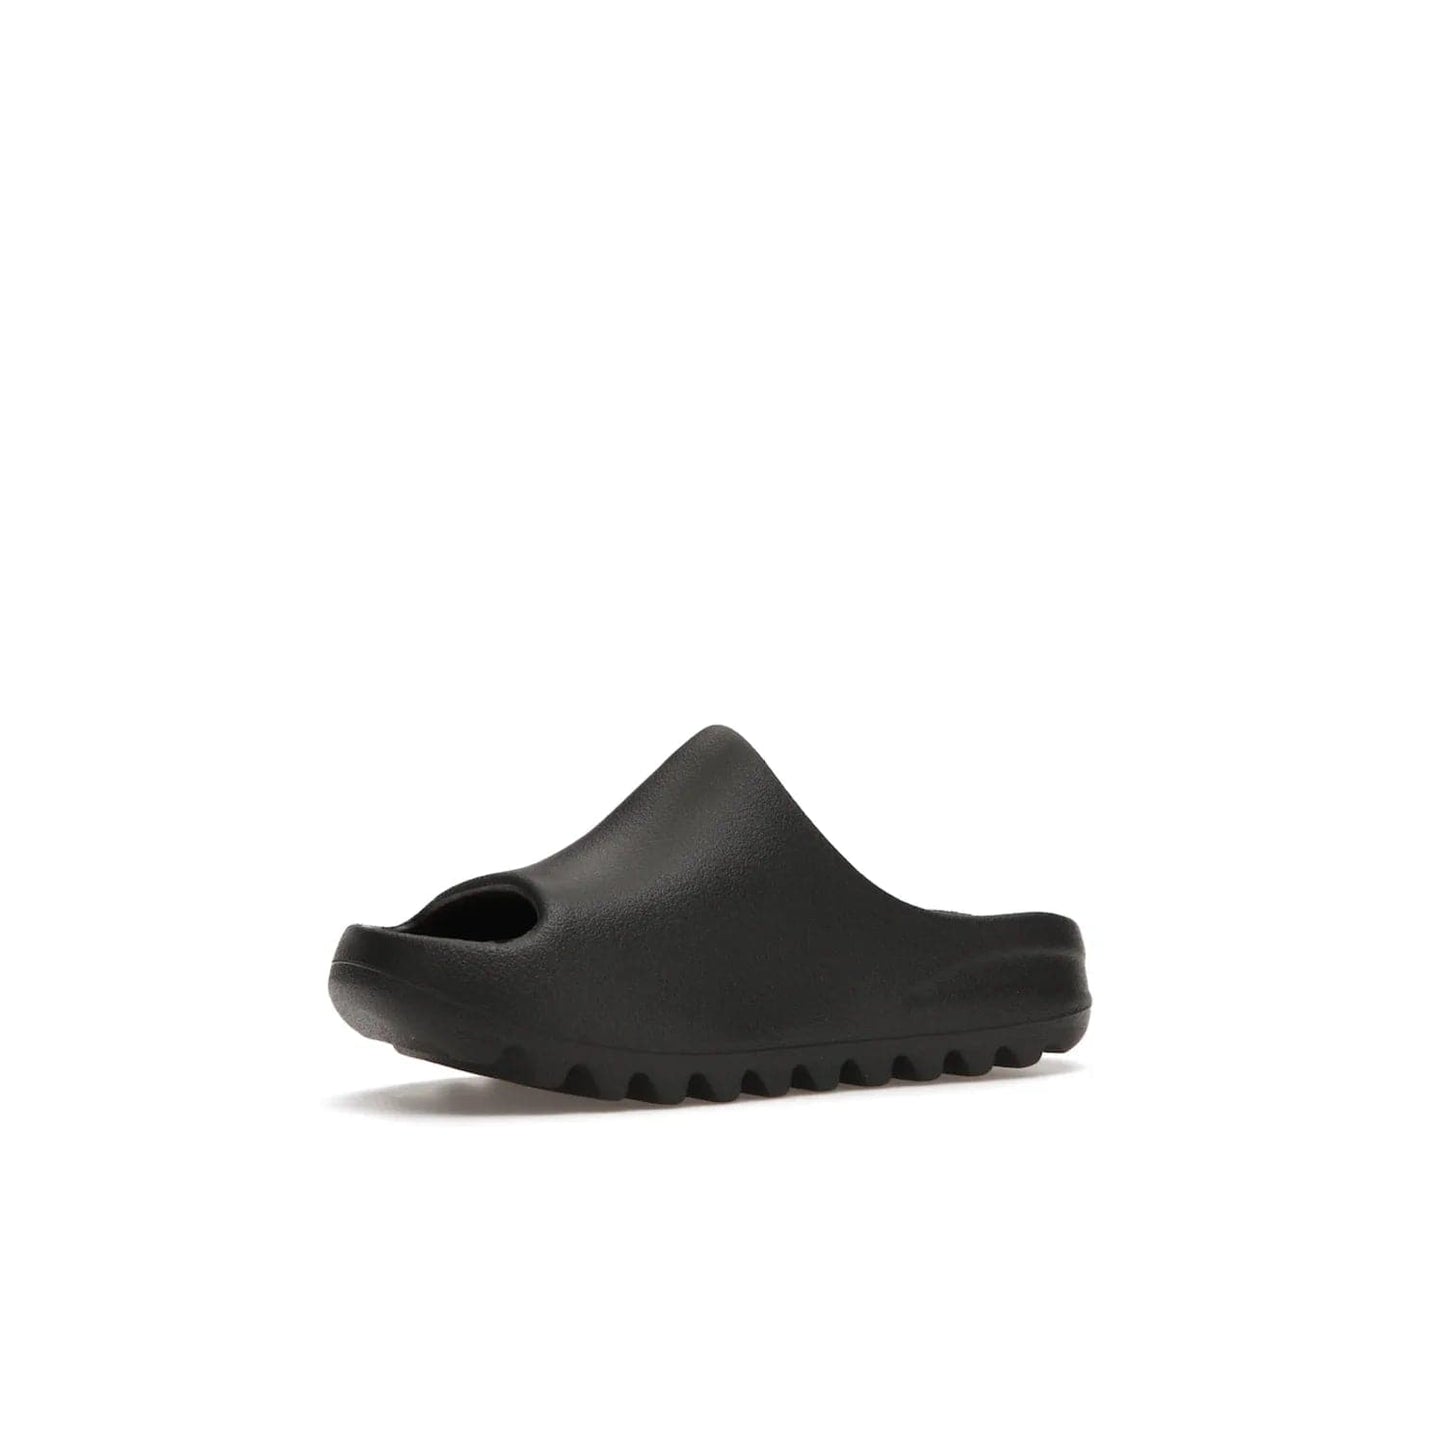 adidas Yeezy Slide Onyx (Kids) - Image 16 - Only at www.BallersClubKickz.com - adidas Yeezy Slide Onyx (Kids): Comfortable foam construction with textured surface and iconic three-stripe logo. Breathable, open-toe design and deep grooves for traction. Released in March 2021 at $50.